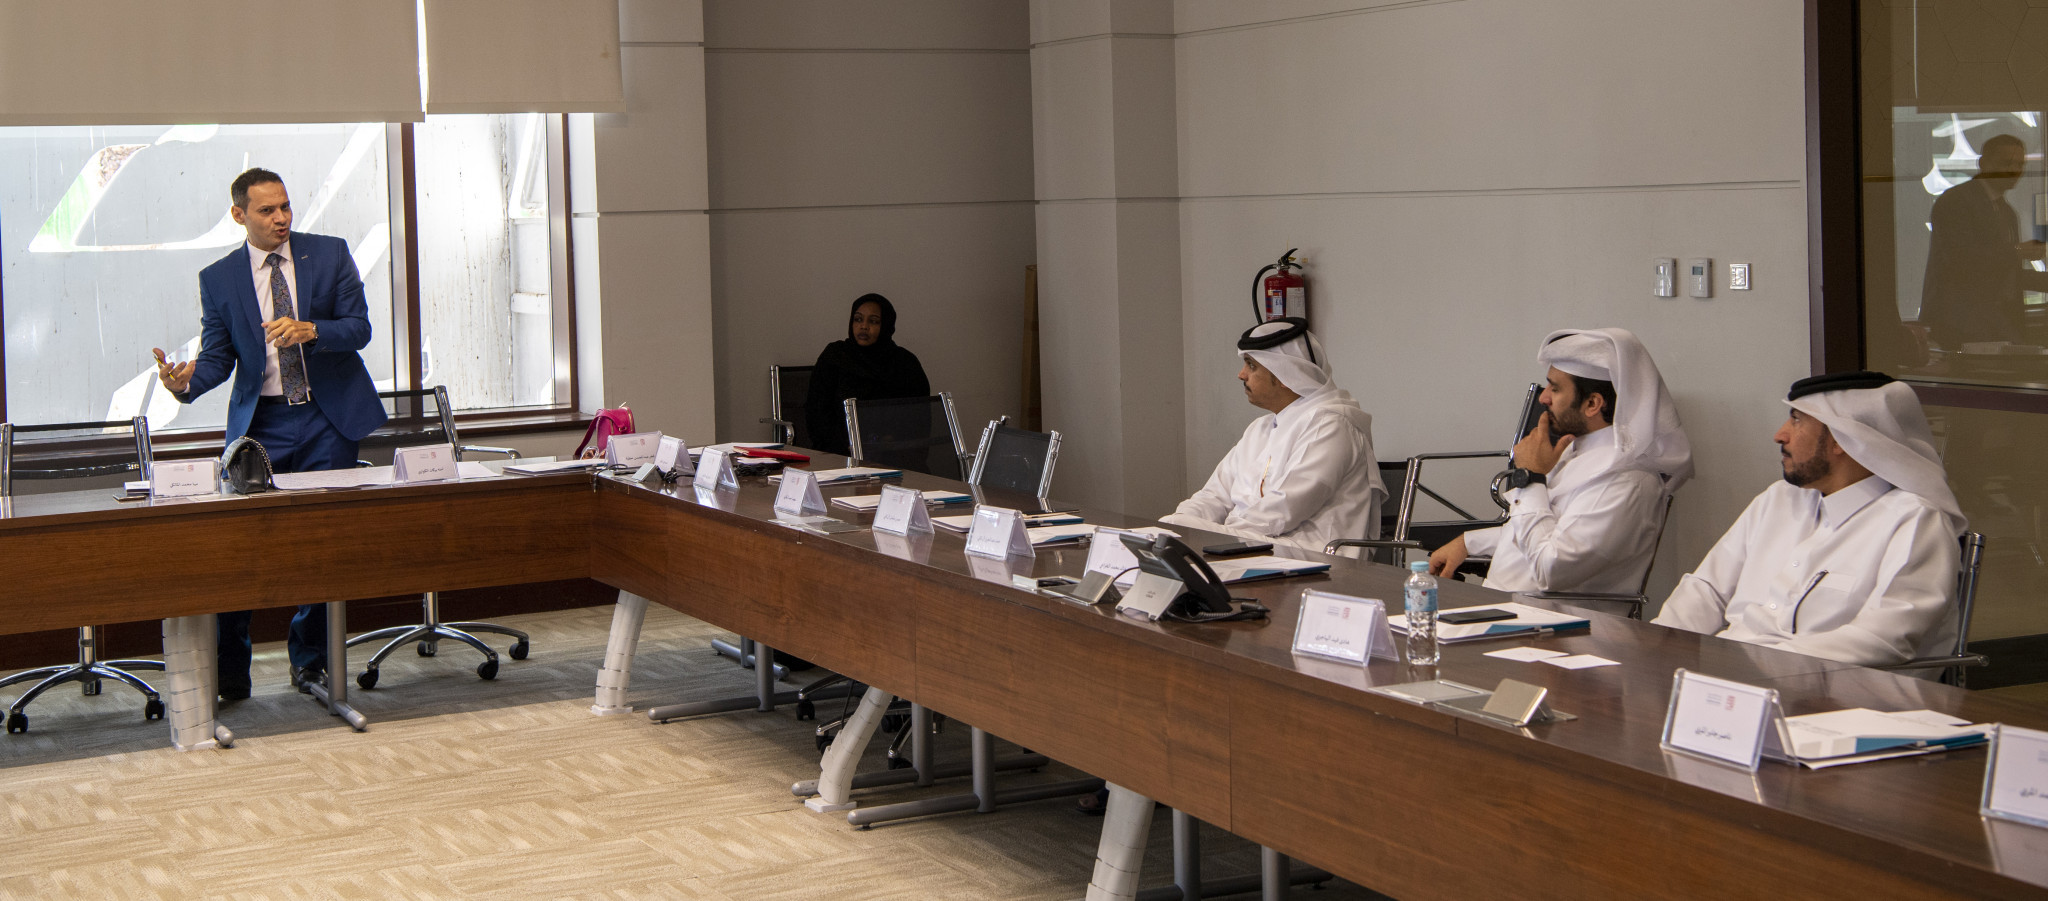 A Qatar Olympic Committee training course on "Olympic Principles" is being held in Doha ©QOC